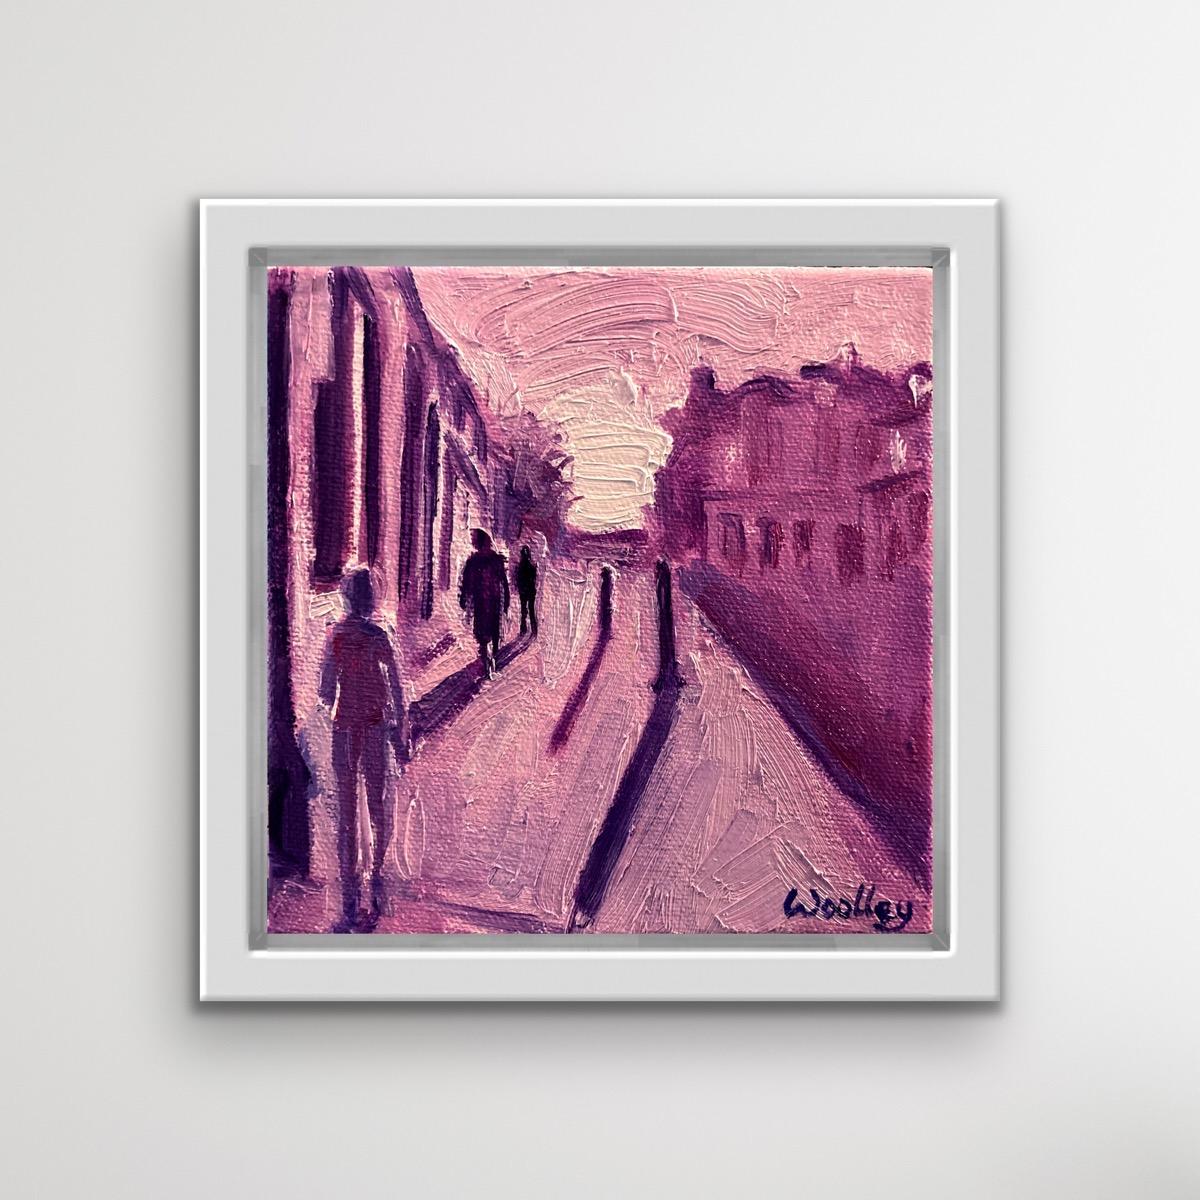 A Wintry Walk Home [December 2022]

A Wintry Walk Home is an Original Painting by Eleanor Woolley. The low winter sun throws shadows on the pavement as people walk home, early evening. Lovely pinks and mauves make up this painting, the bright white